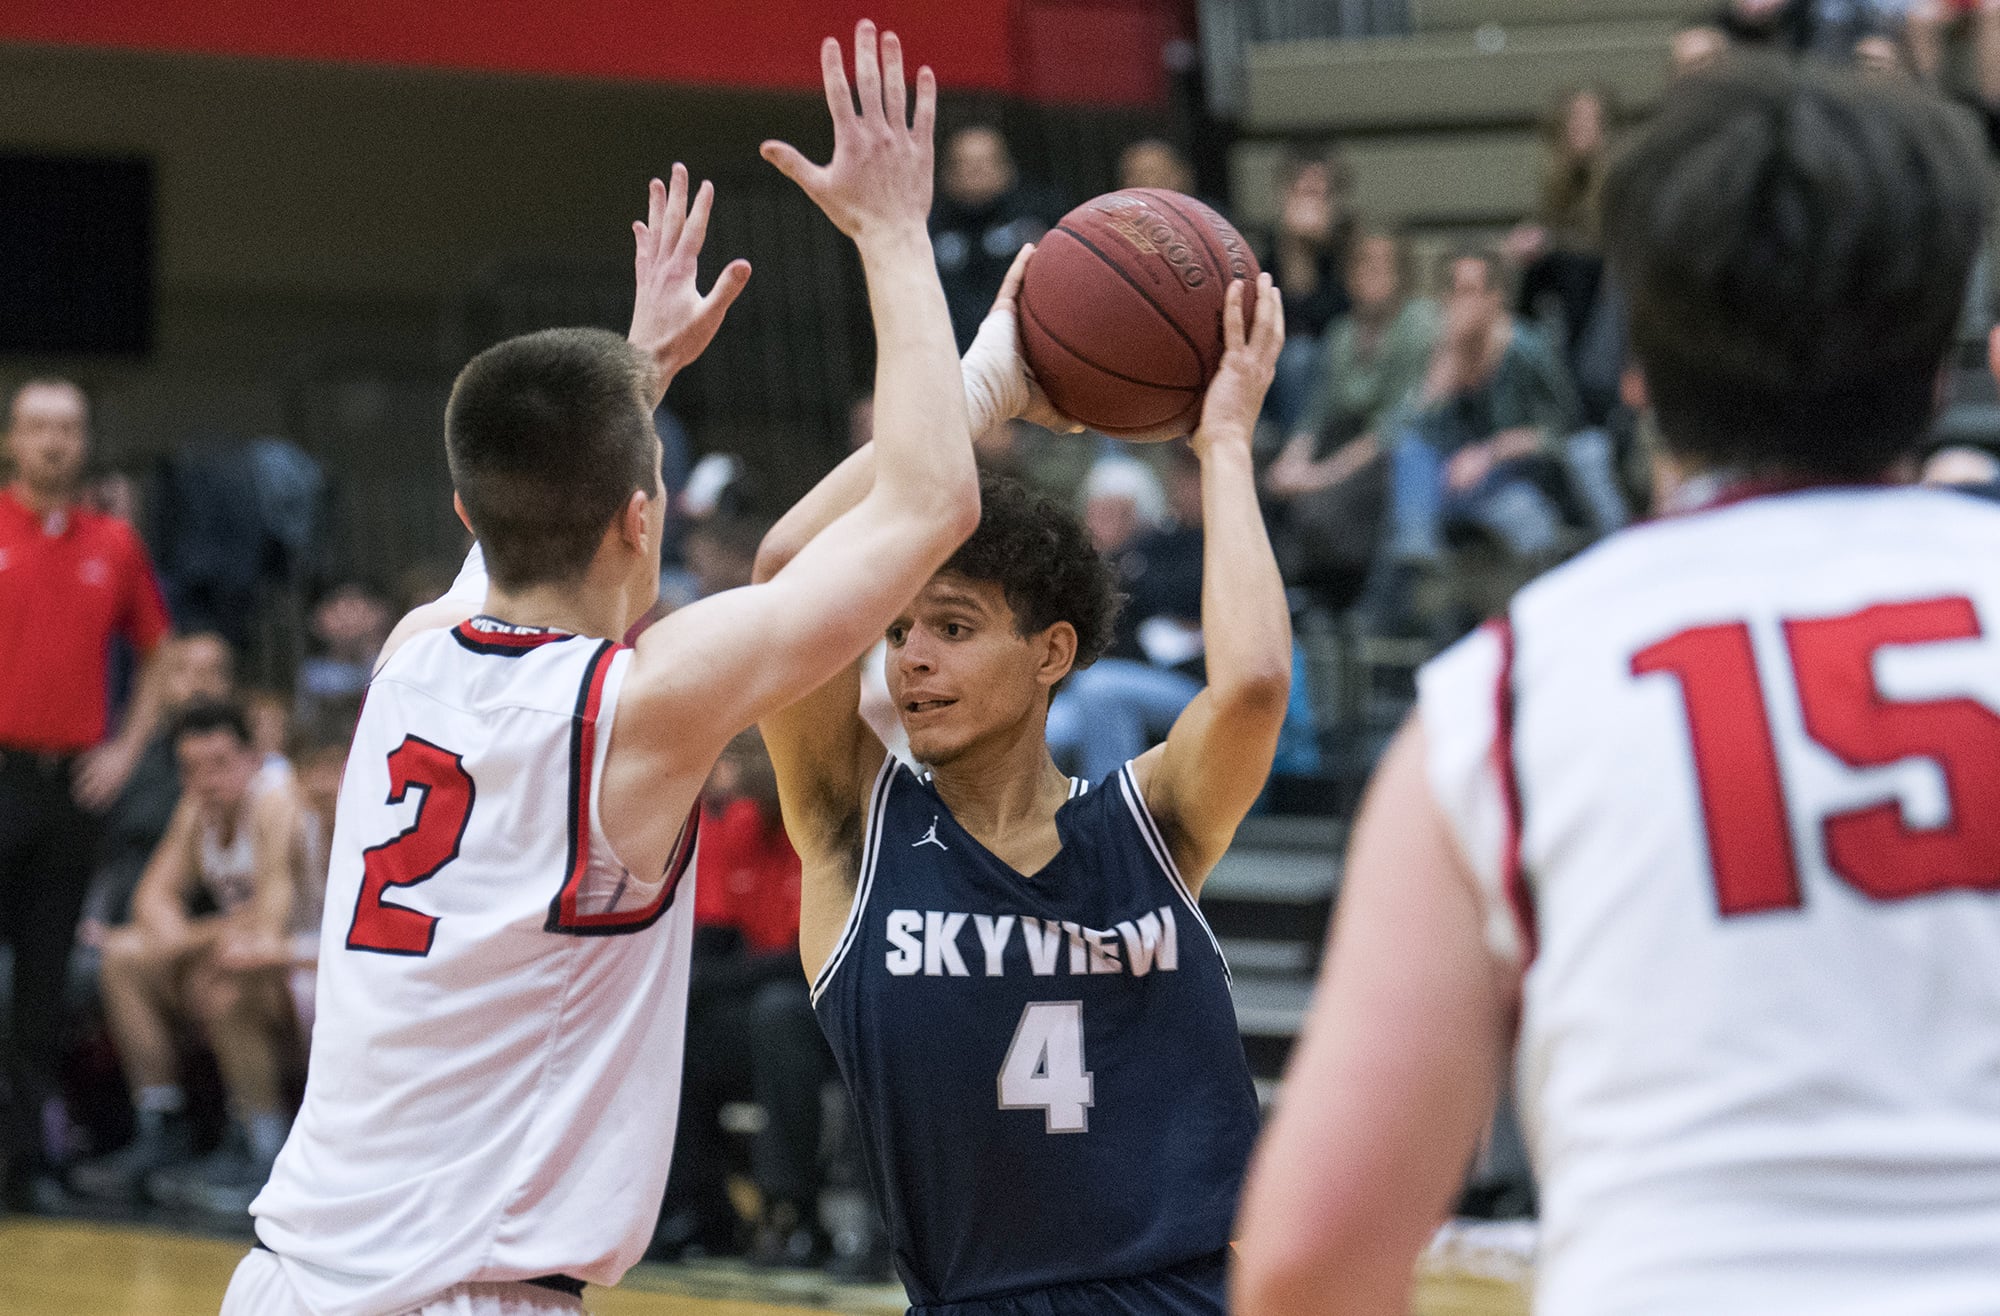 Skyview's Squeeky Johnson (4) looks to pass during Friday night's game against Camas at Camas High School on Jan. 11, 2019.